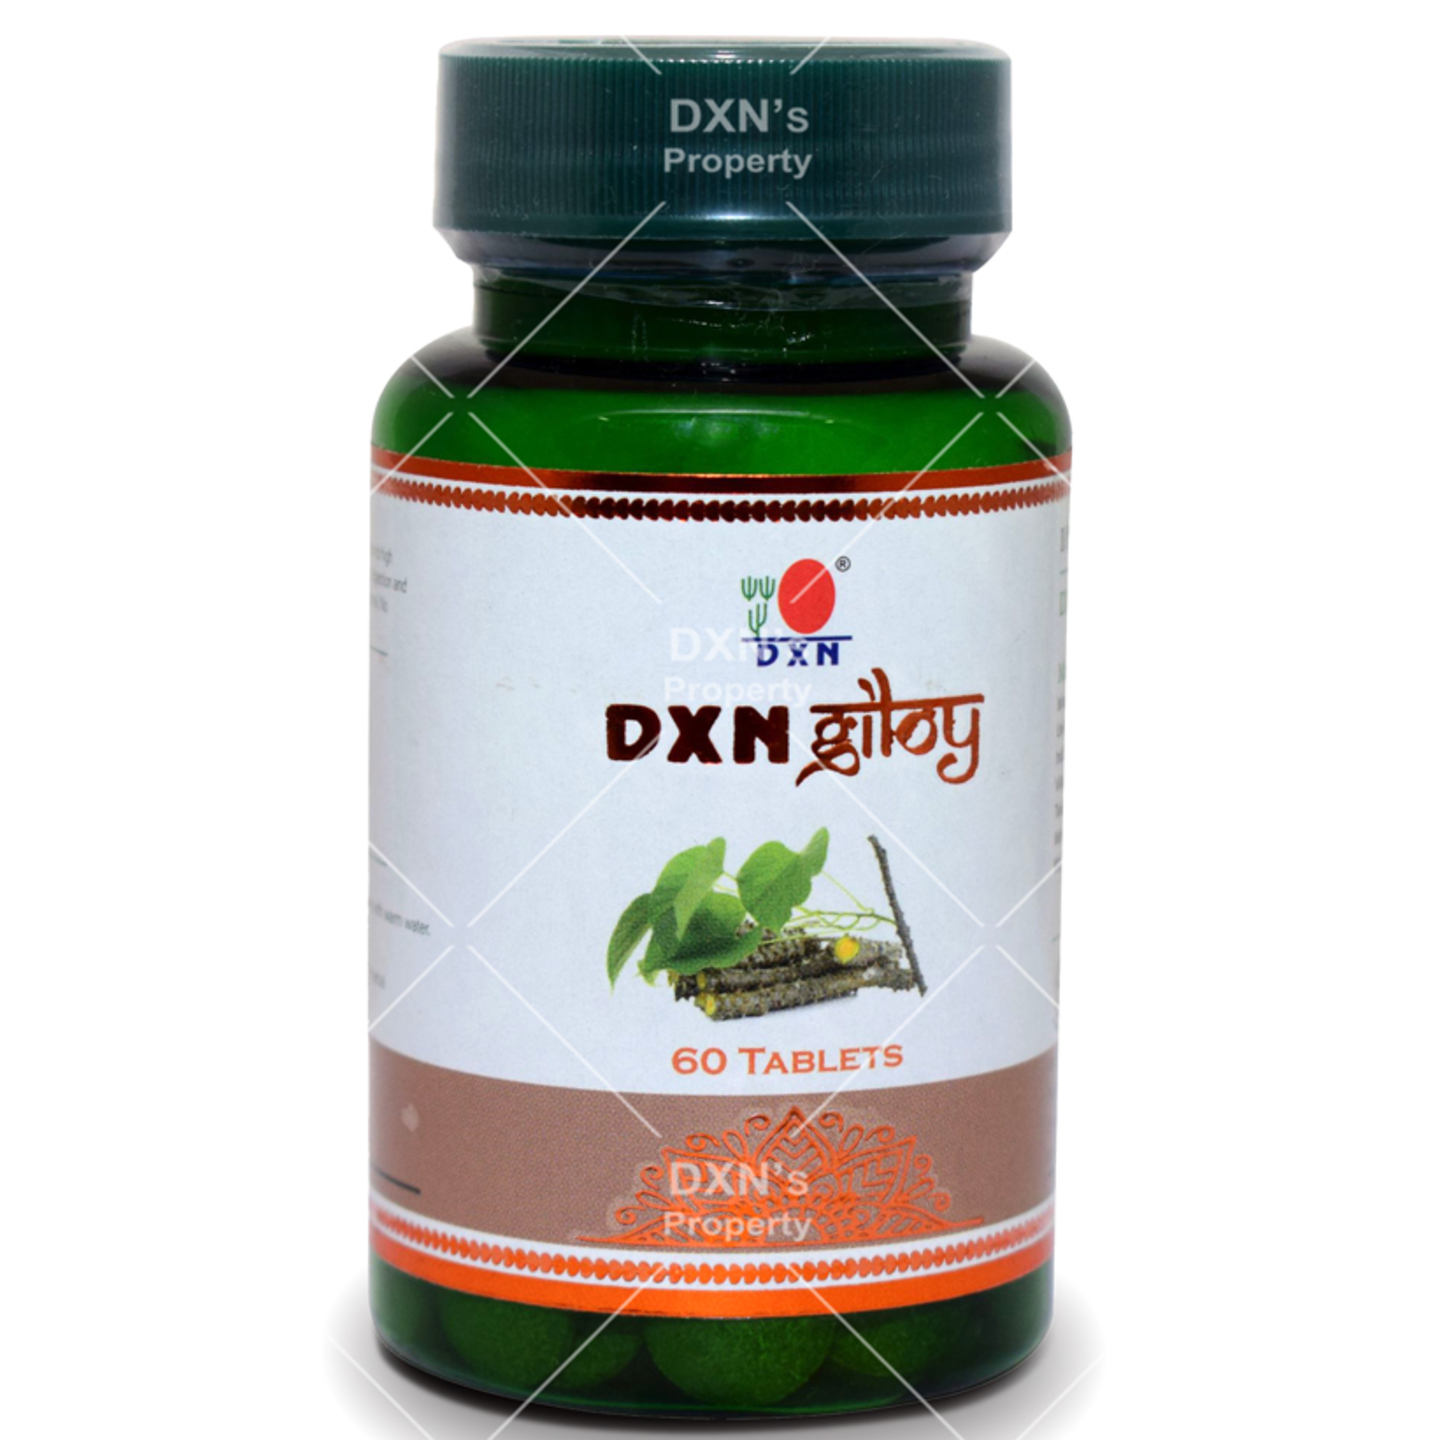 DXN Giloy 60 tablets x 400mg